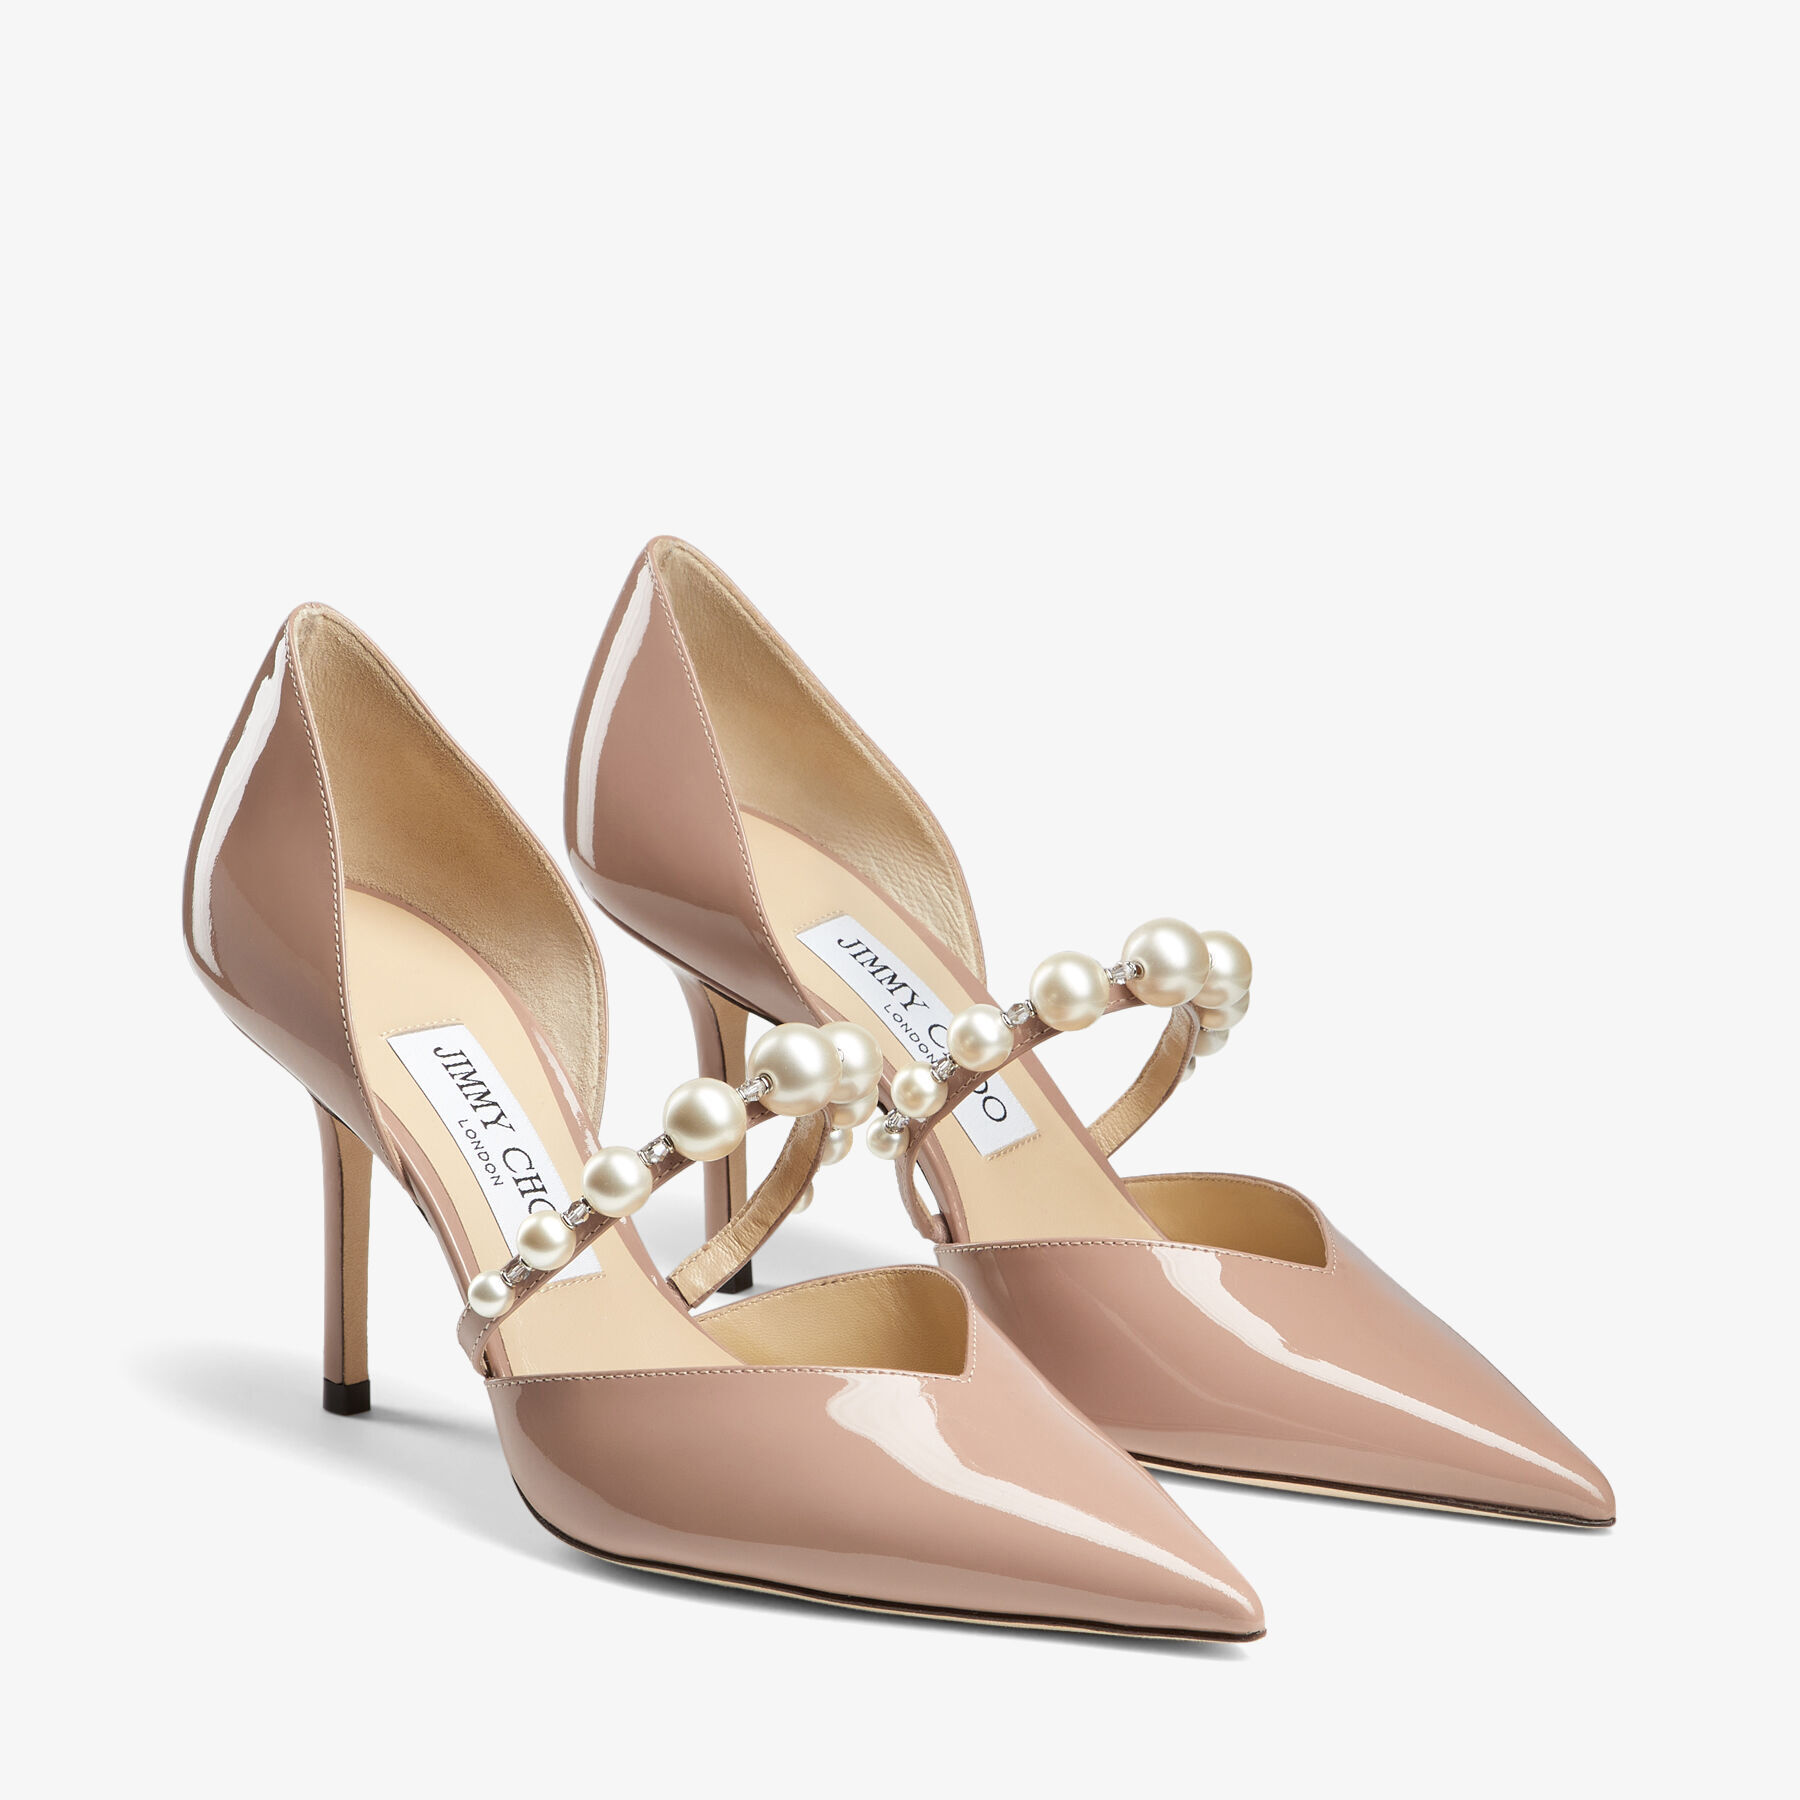 Ballet Pink Patent Leather Pointed Pumps with Pearl Embellishment 